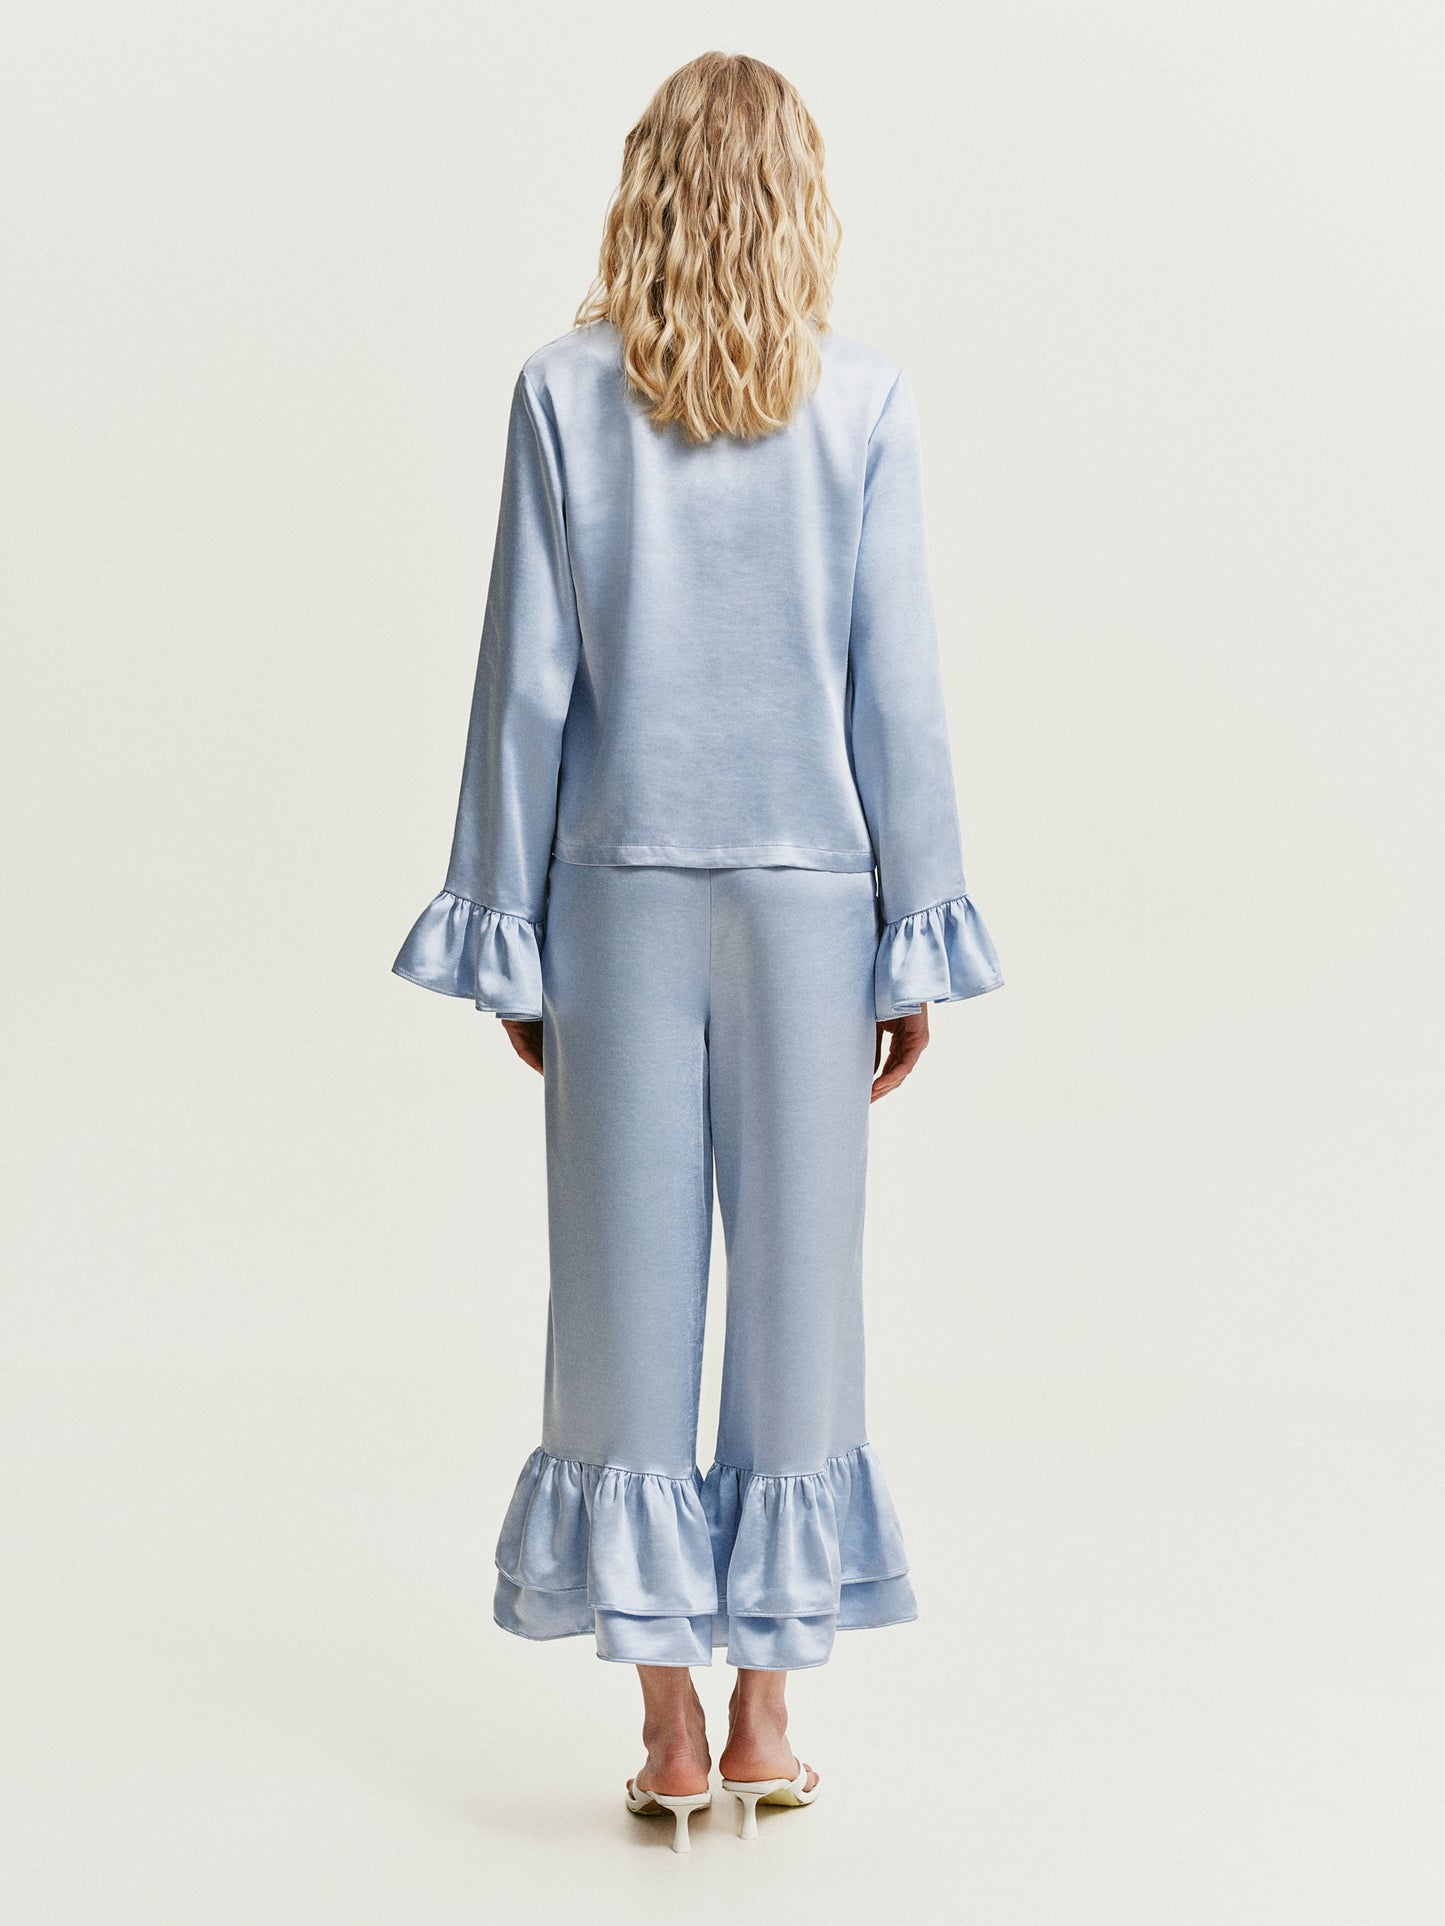 Blue pants with ruffles